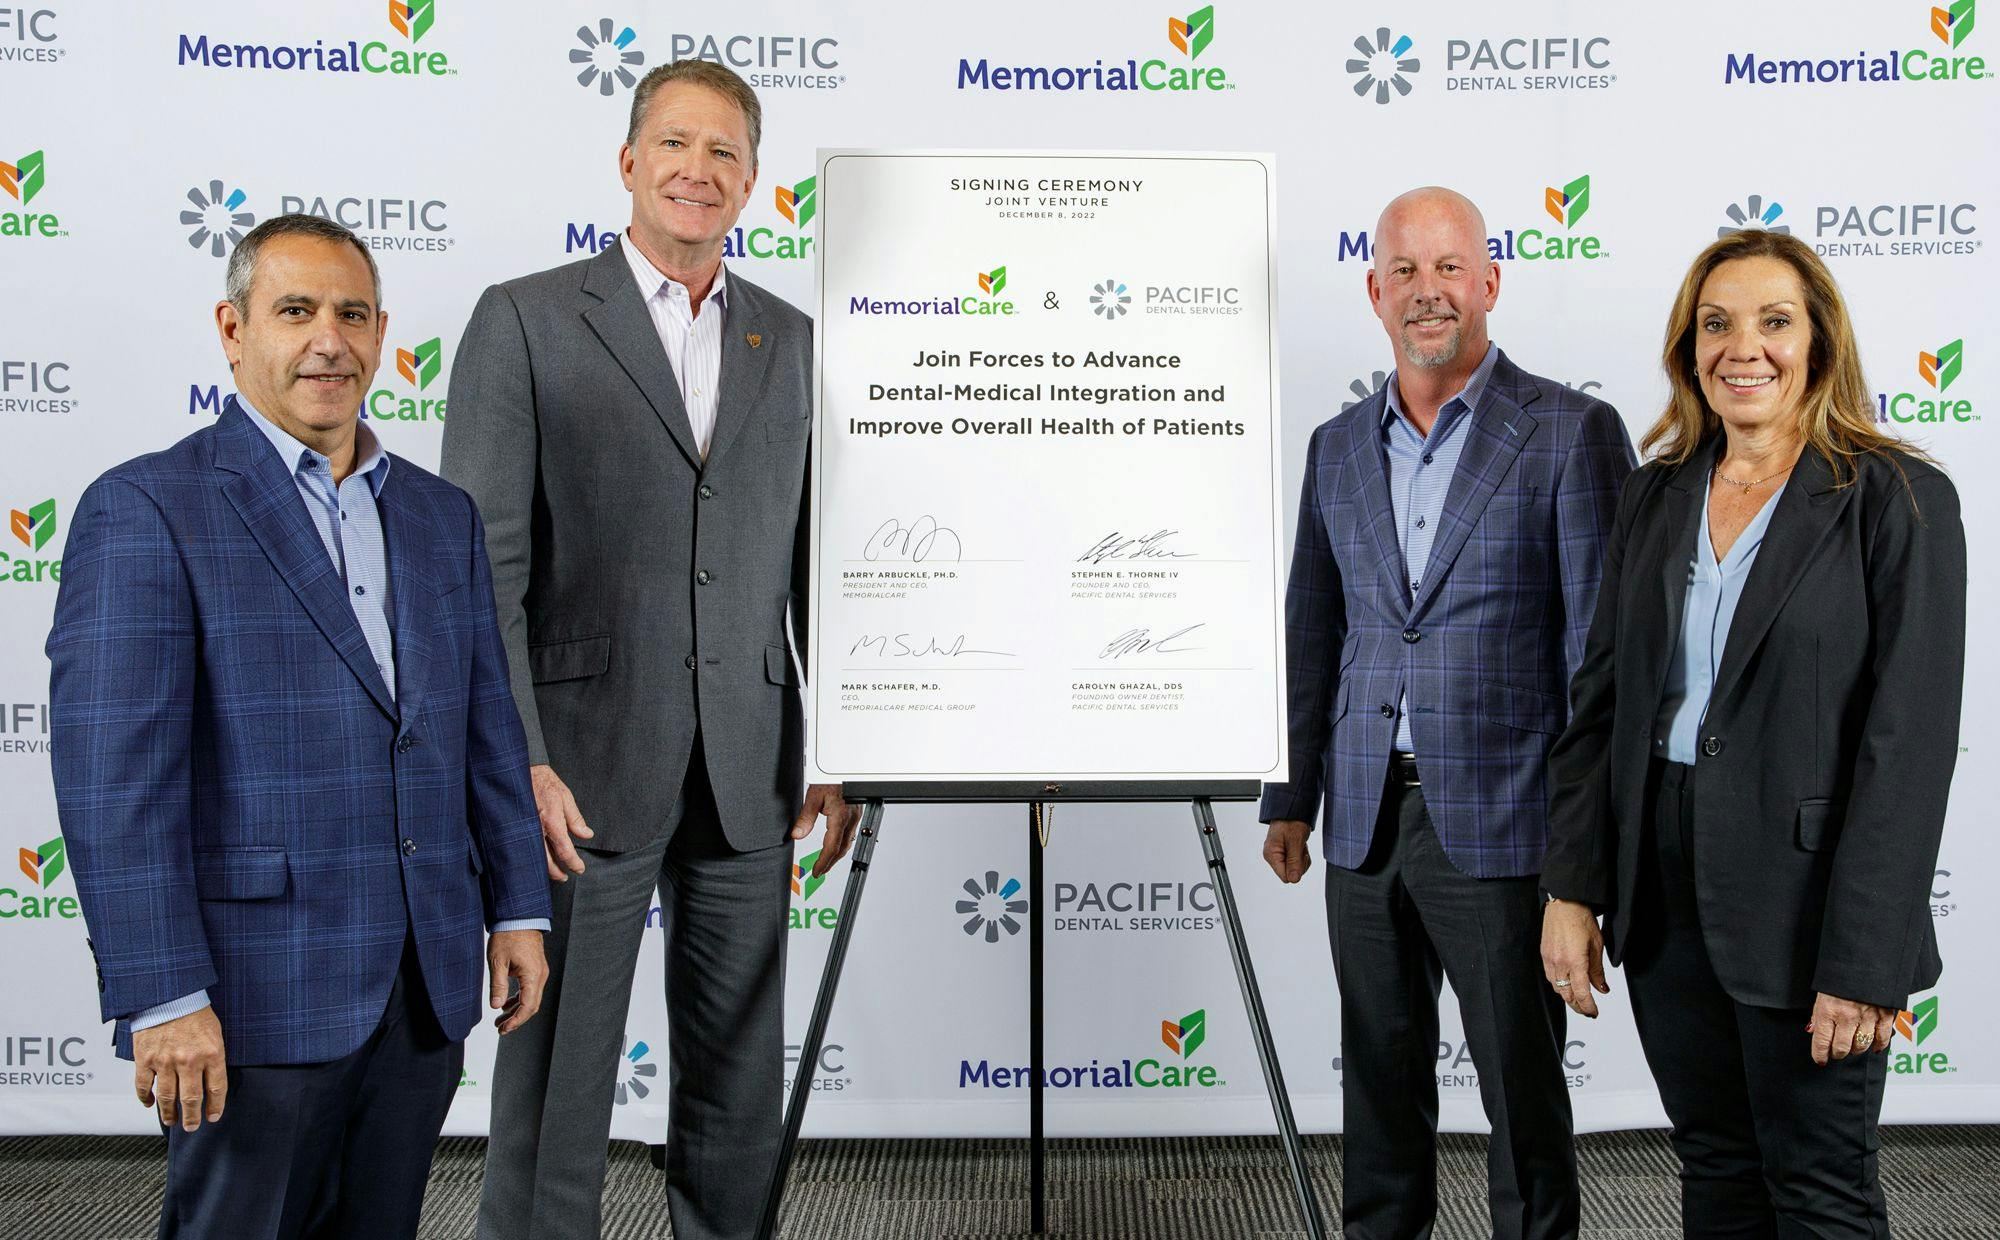 Pacific Dental Services Partners with MemorialCare for Medical Dental Integration